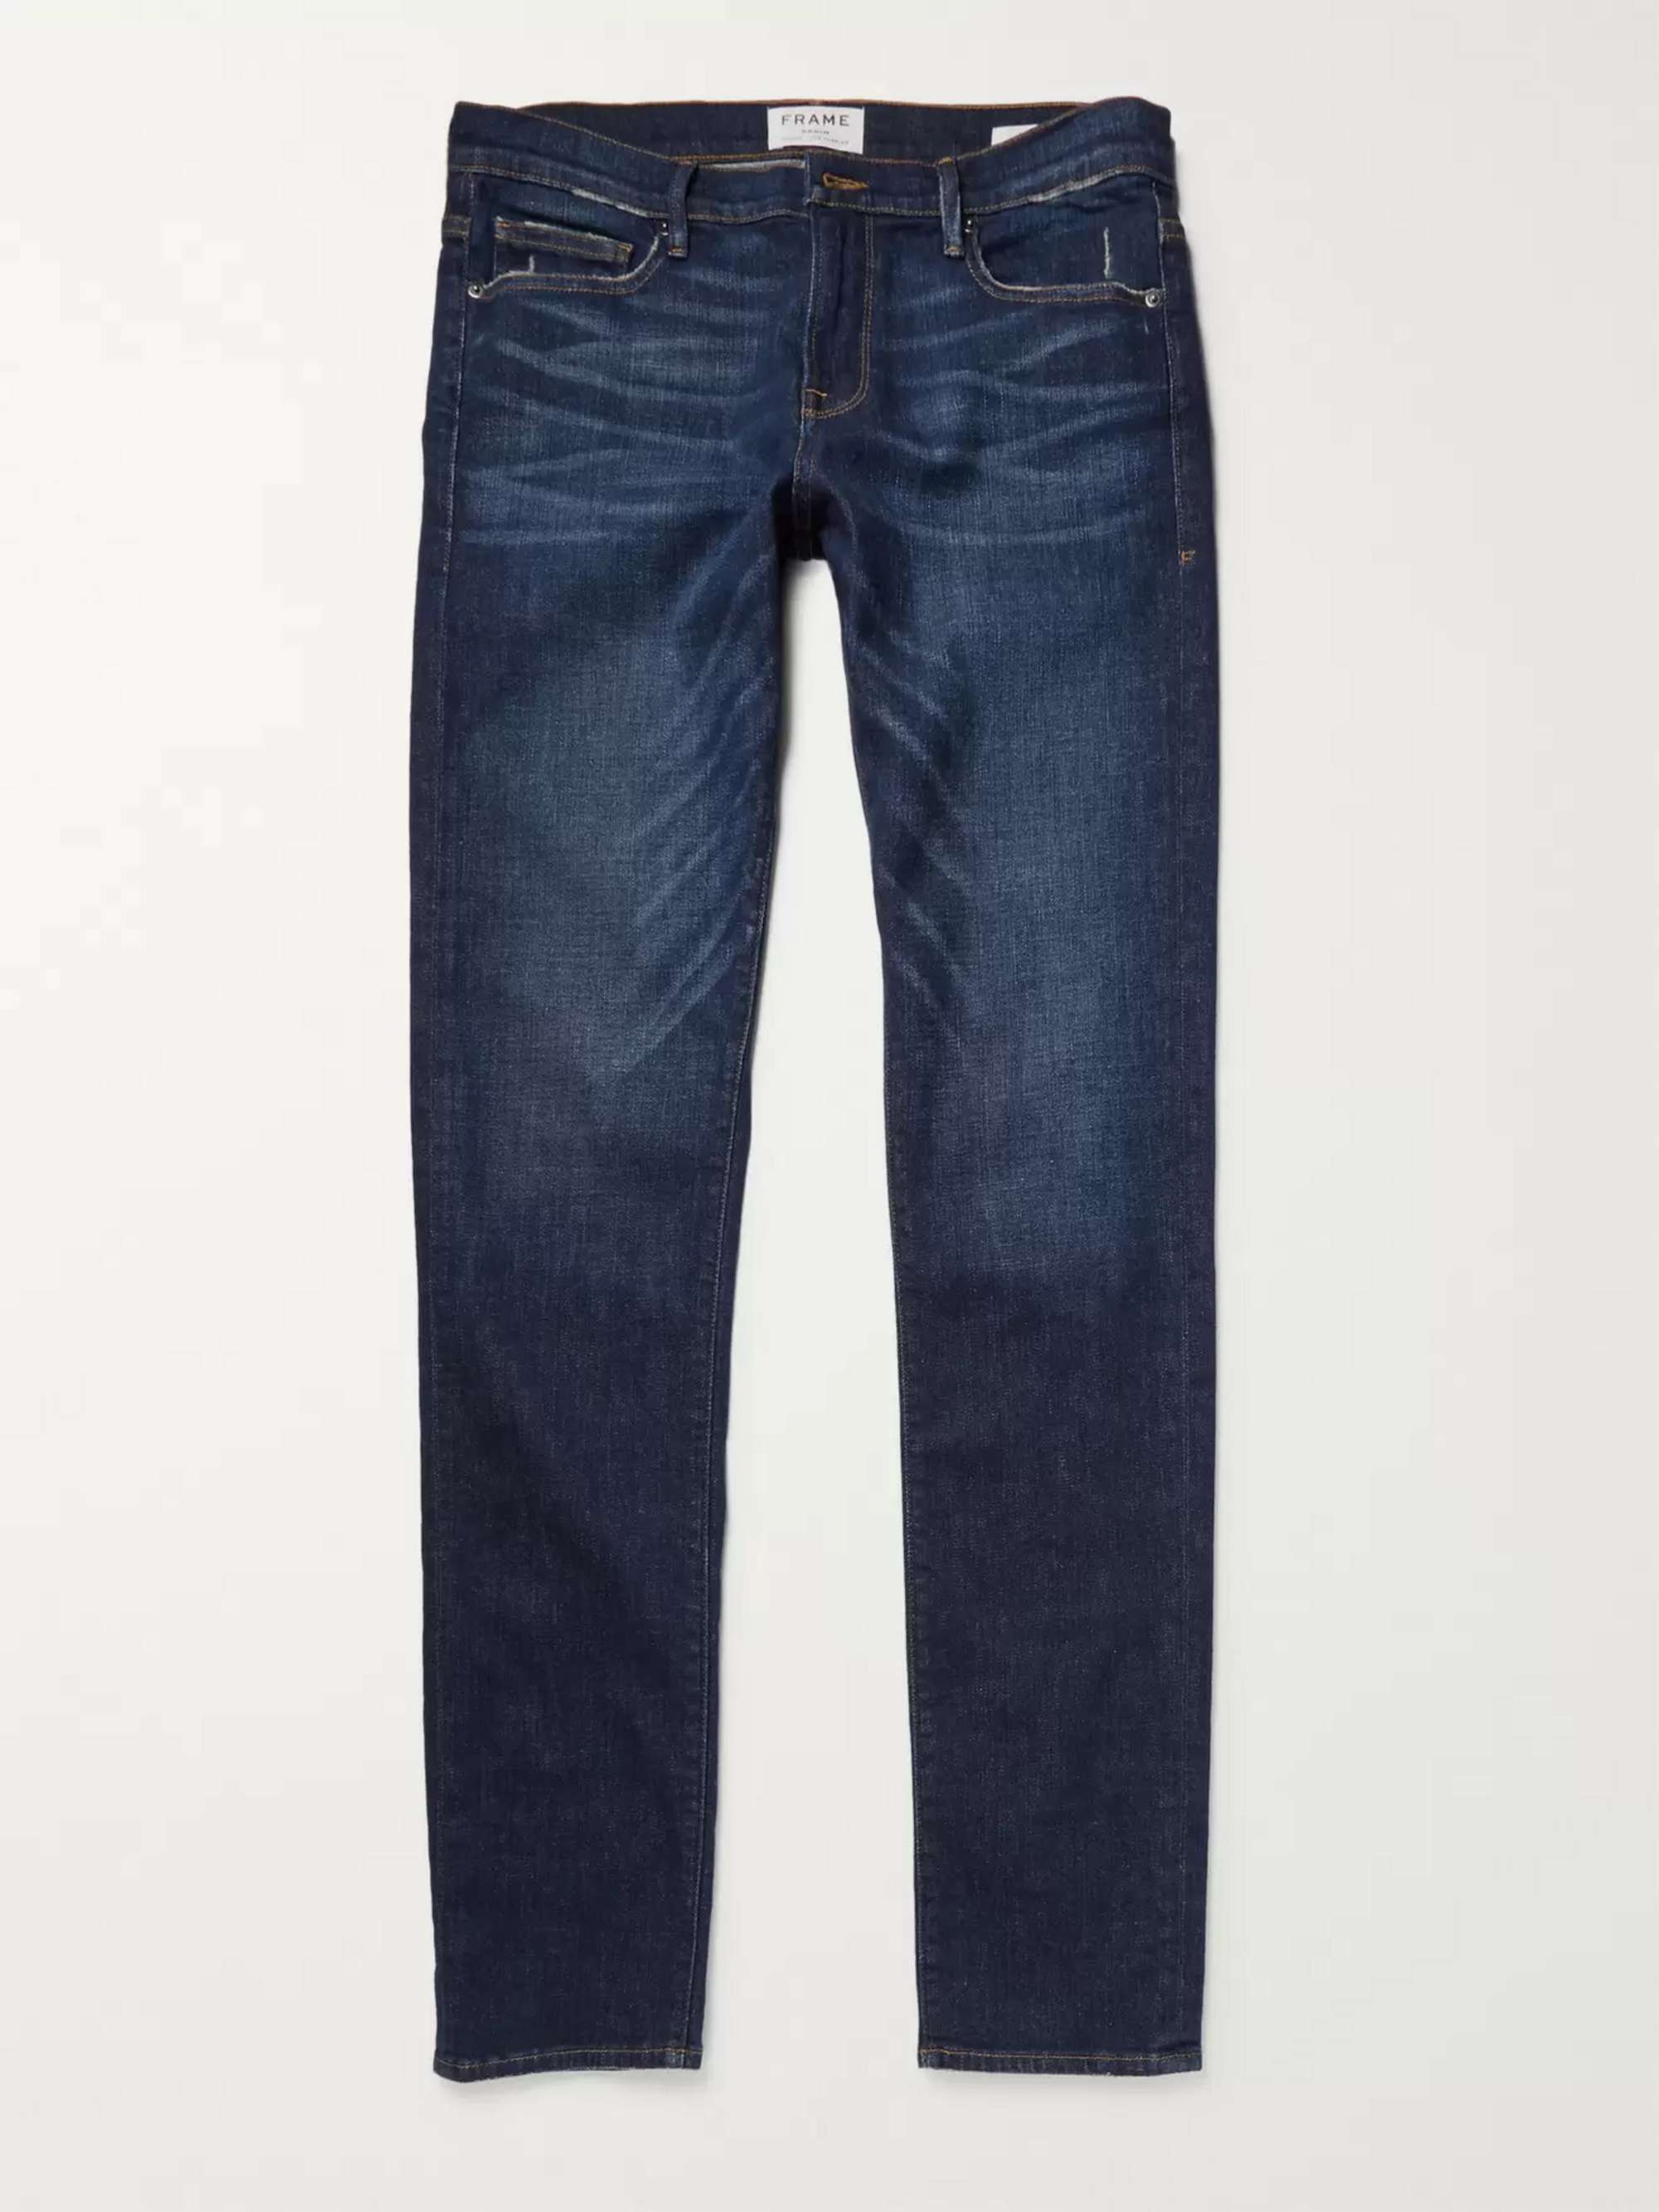 Jeans for Men | Discover Your New Favorite Jeans at Pepe Jeans India!-nextbuild.com.vn